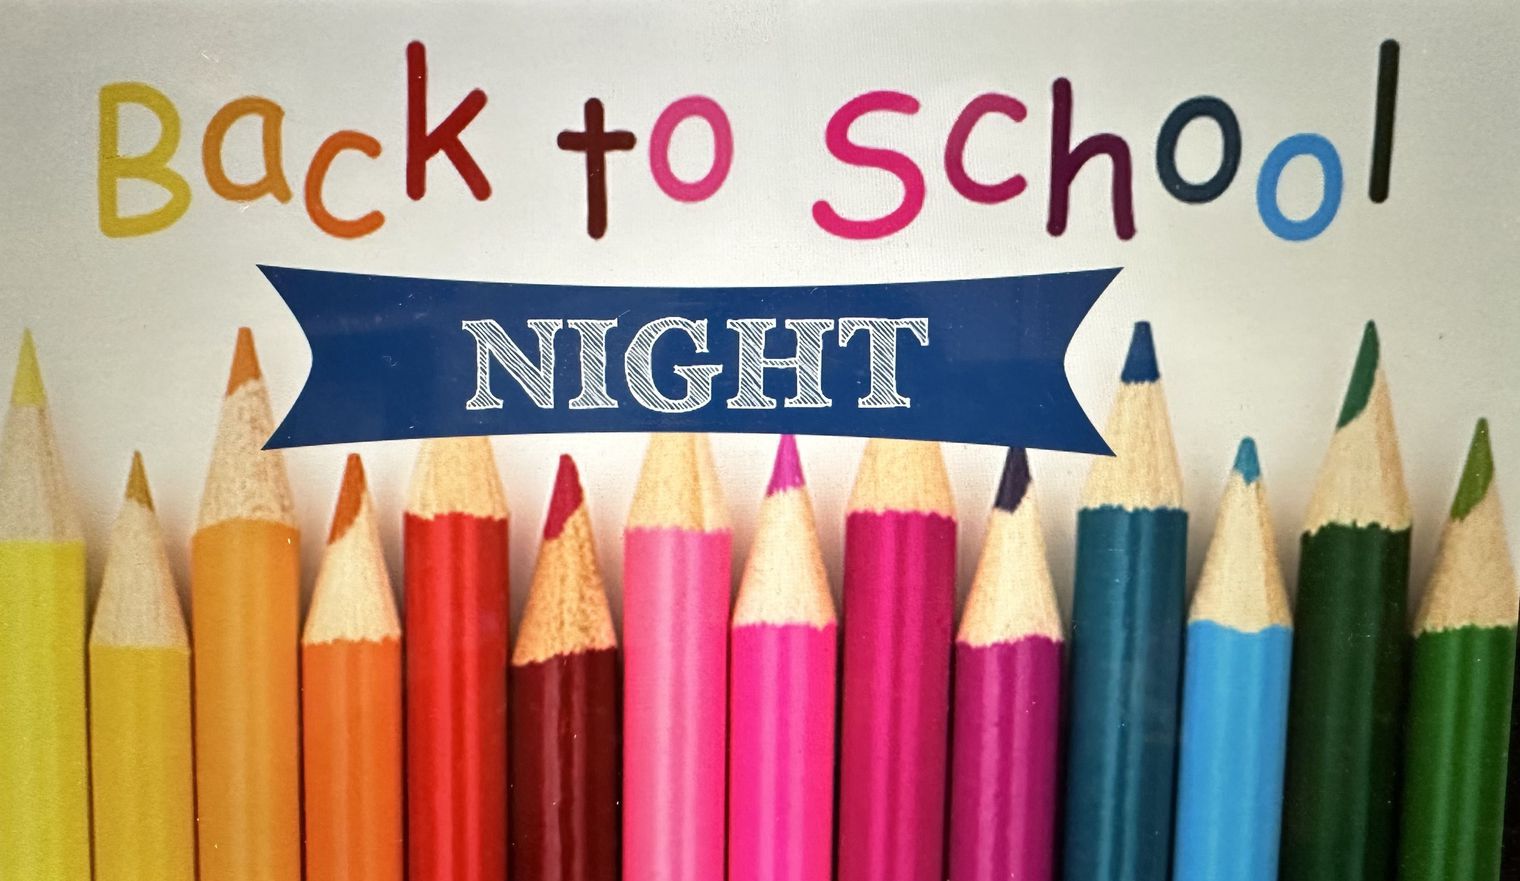 color pencils and back to school night text